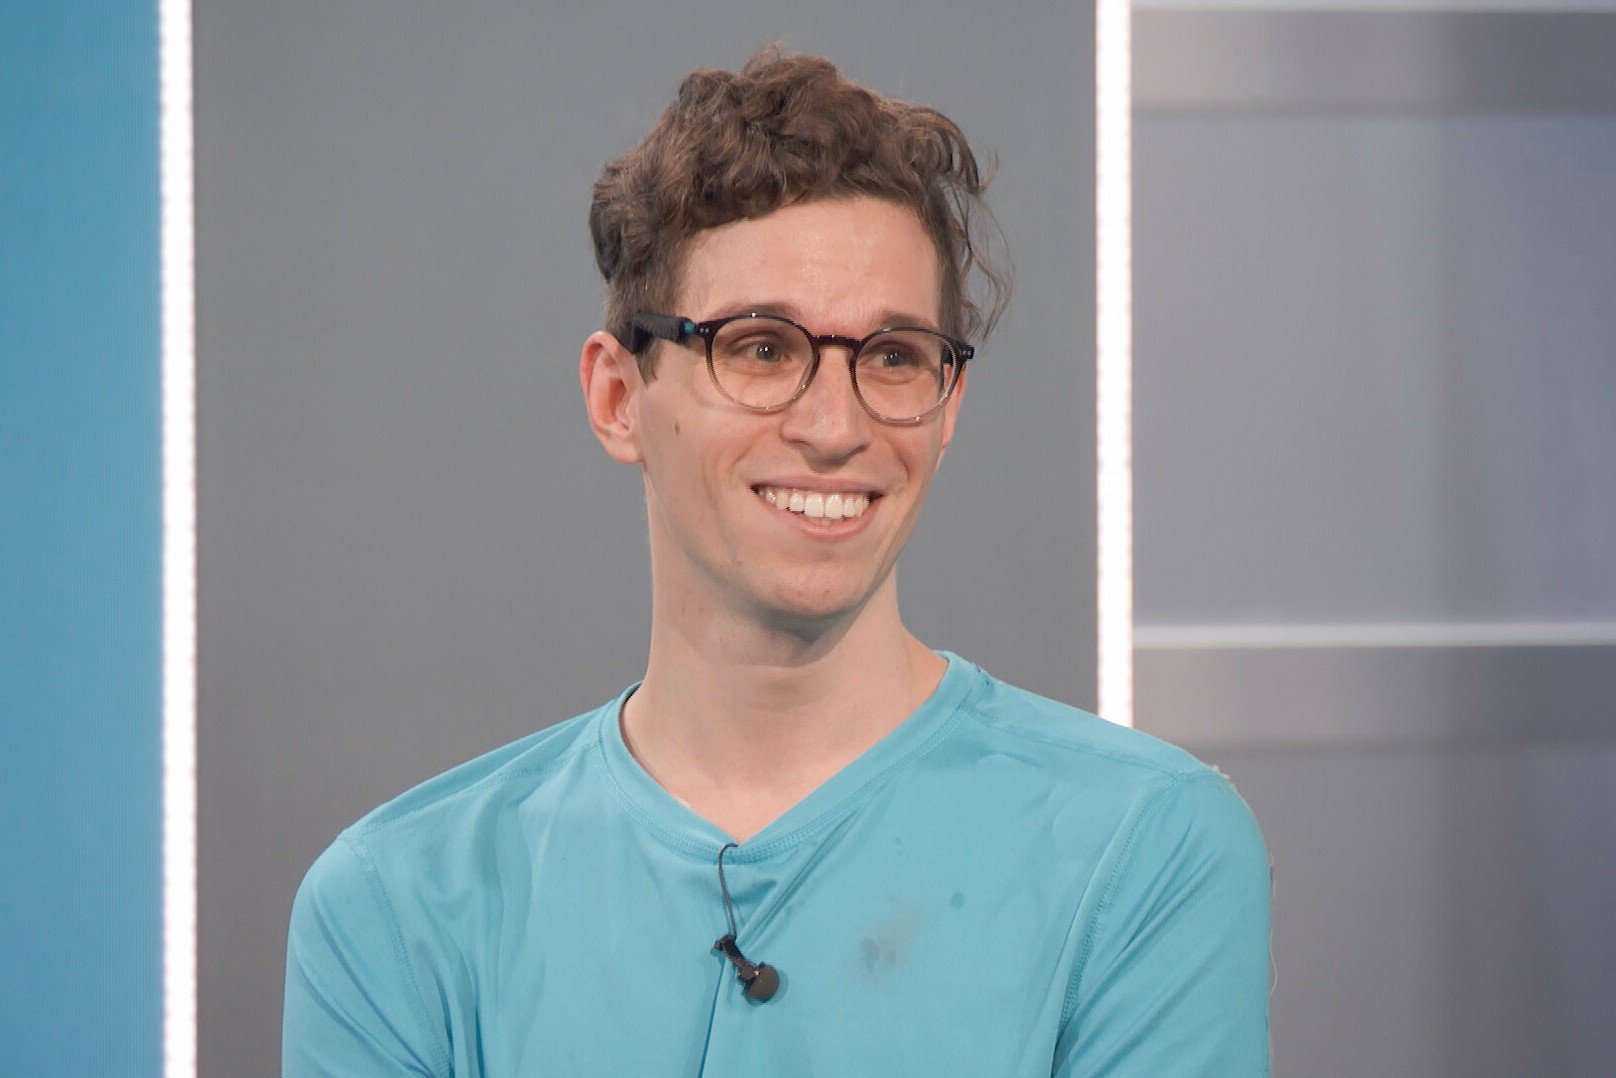 Michael Bruner, who starred in 'Big Brother 24' on CBS, wears a light blue shirt and glasses.